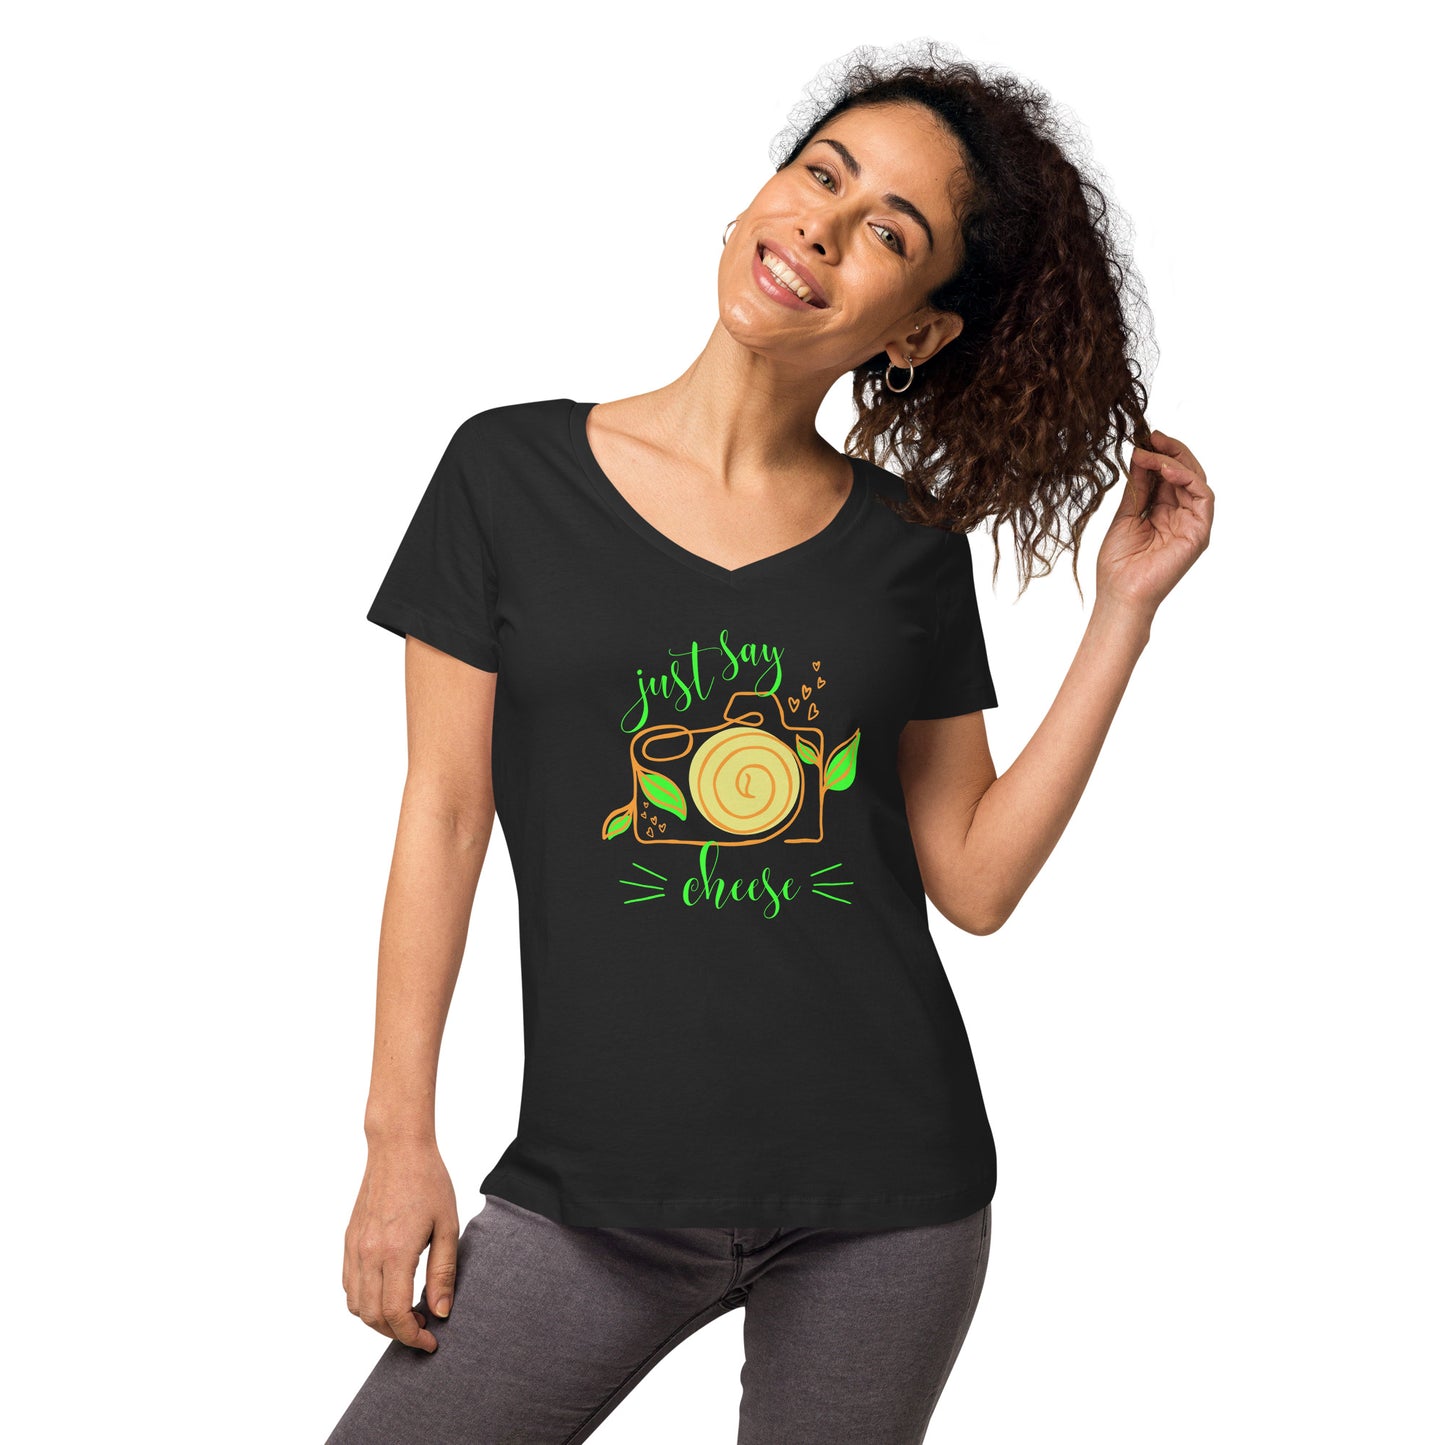 Custom made hobby photographer  V-Neck T-Shirt "Just say Cheese" in black